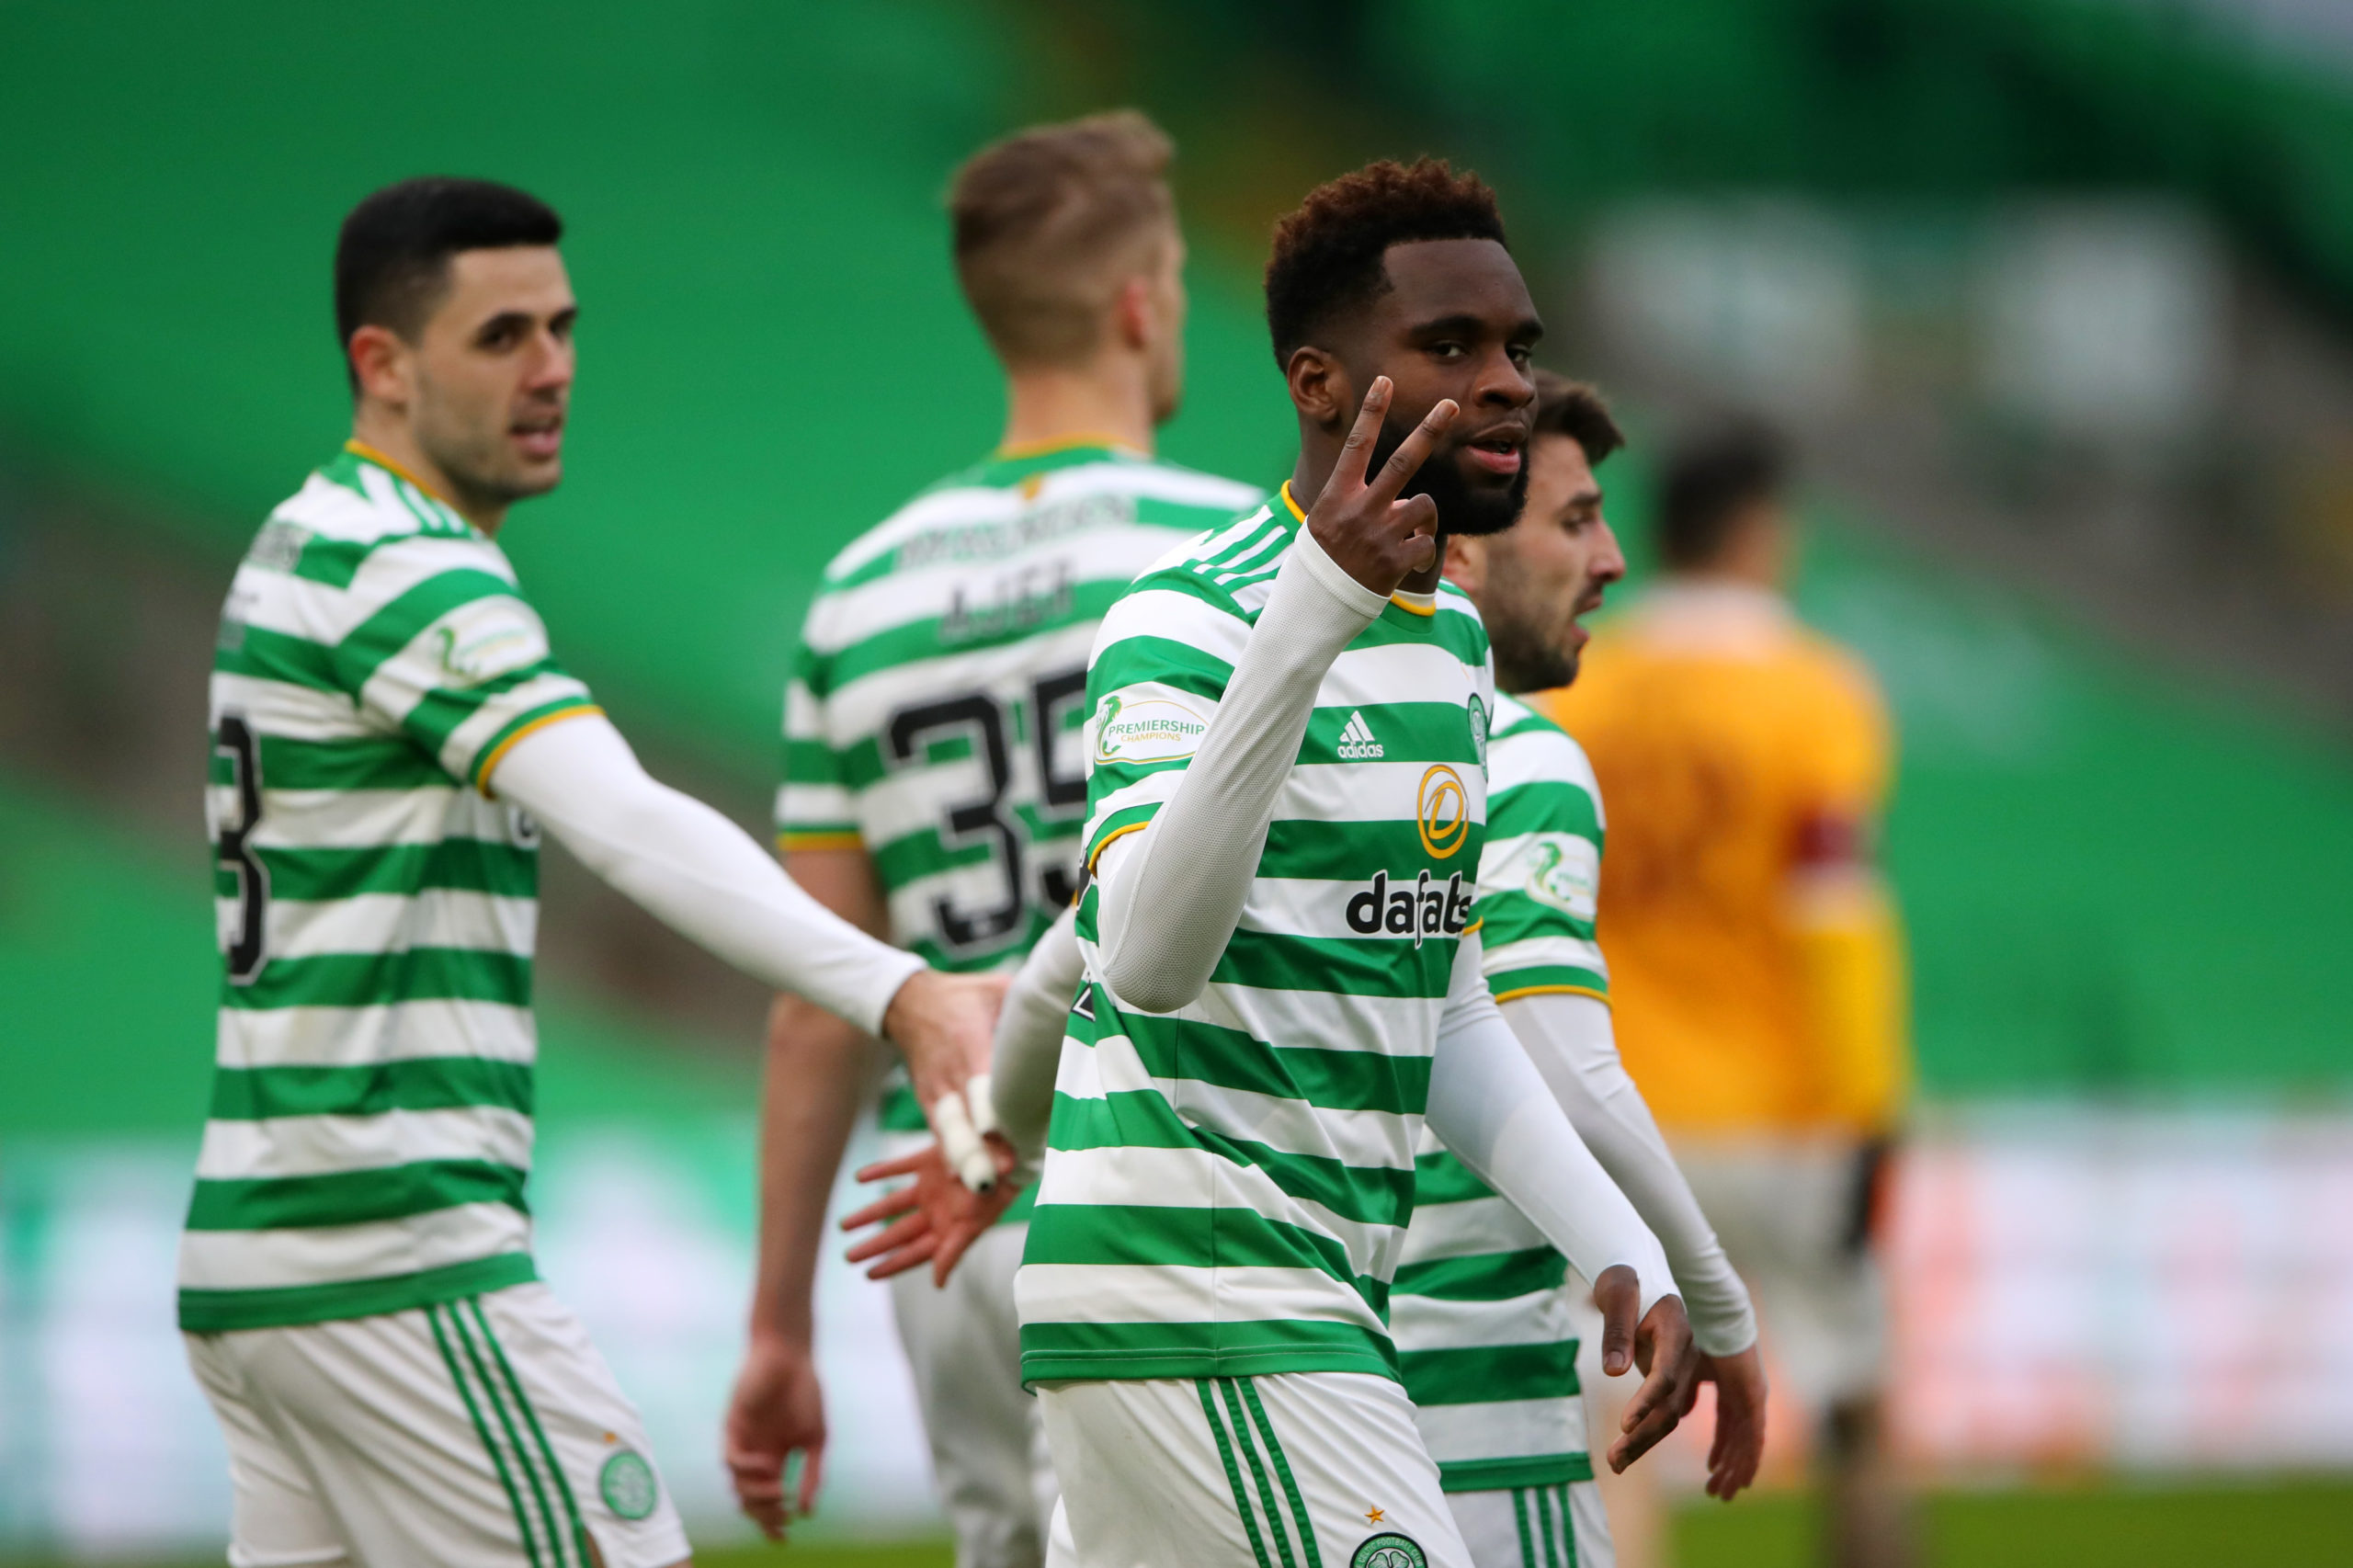 Celtic striker Odsonne Edouard criticism is getting silly